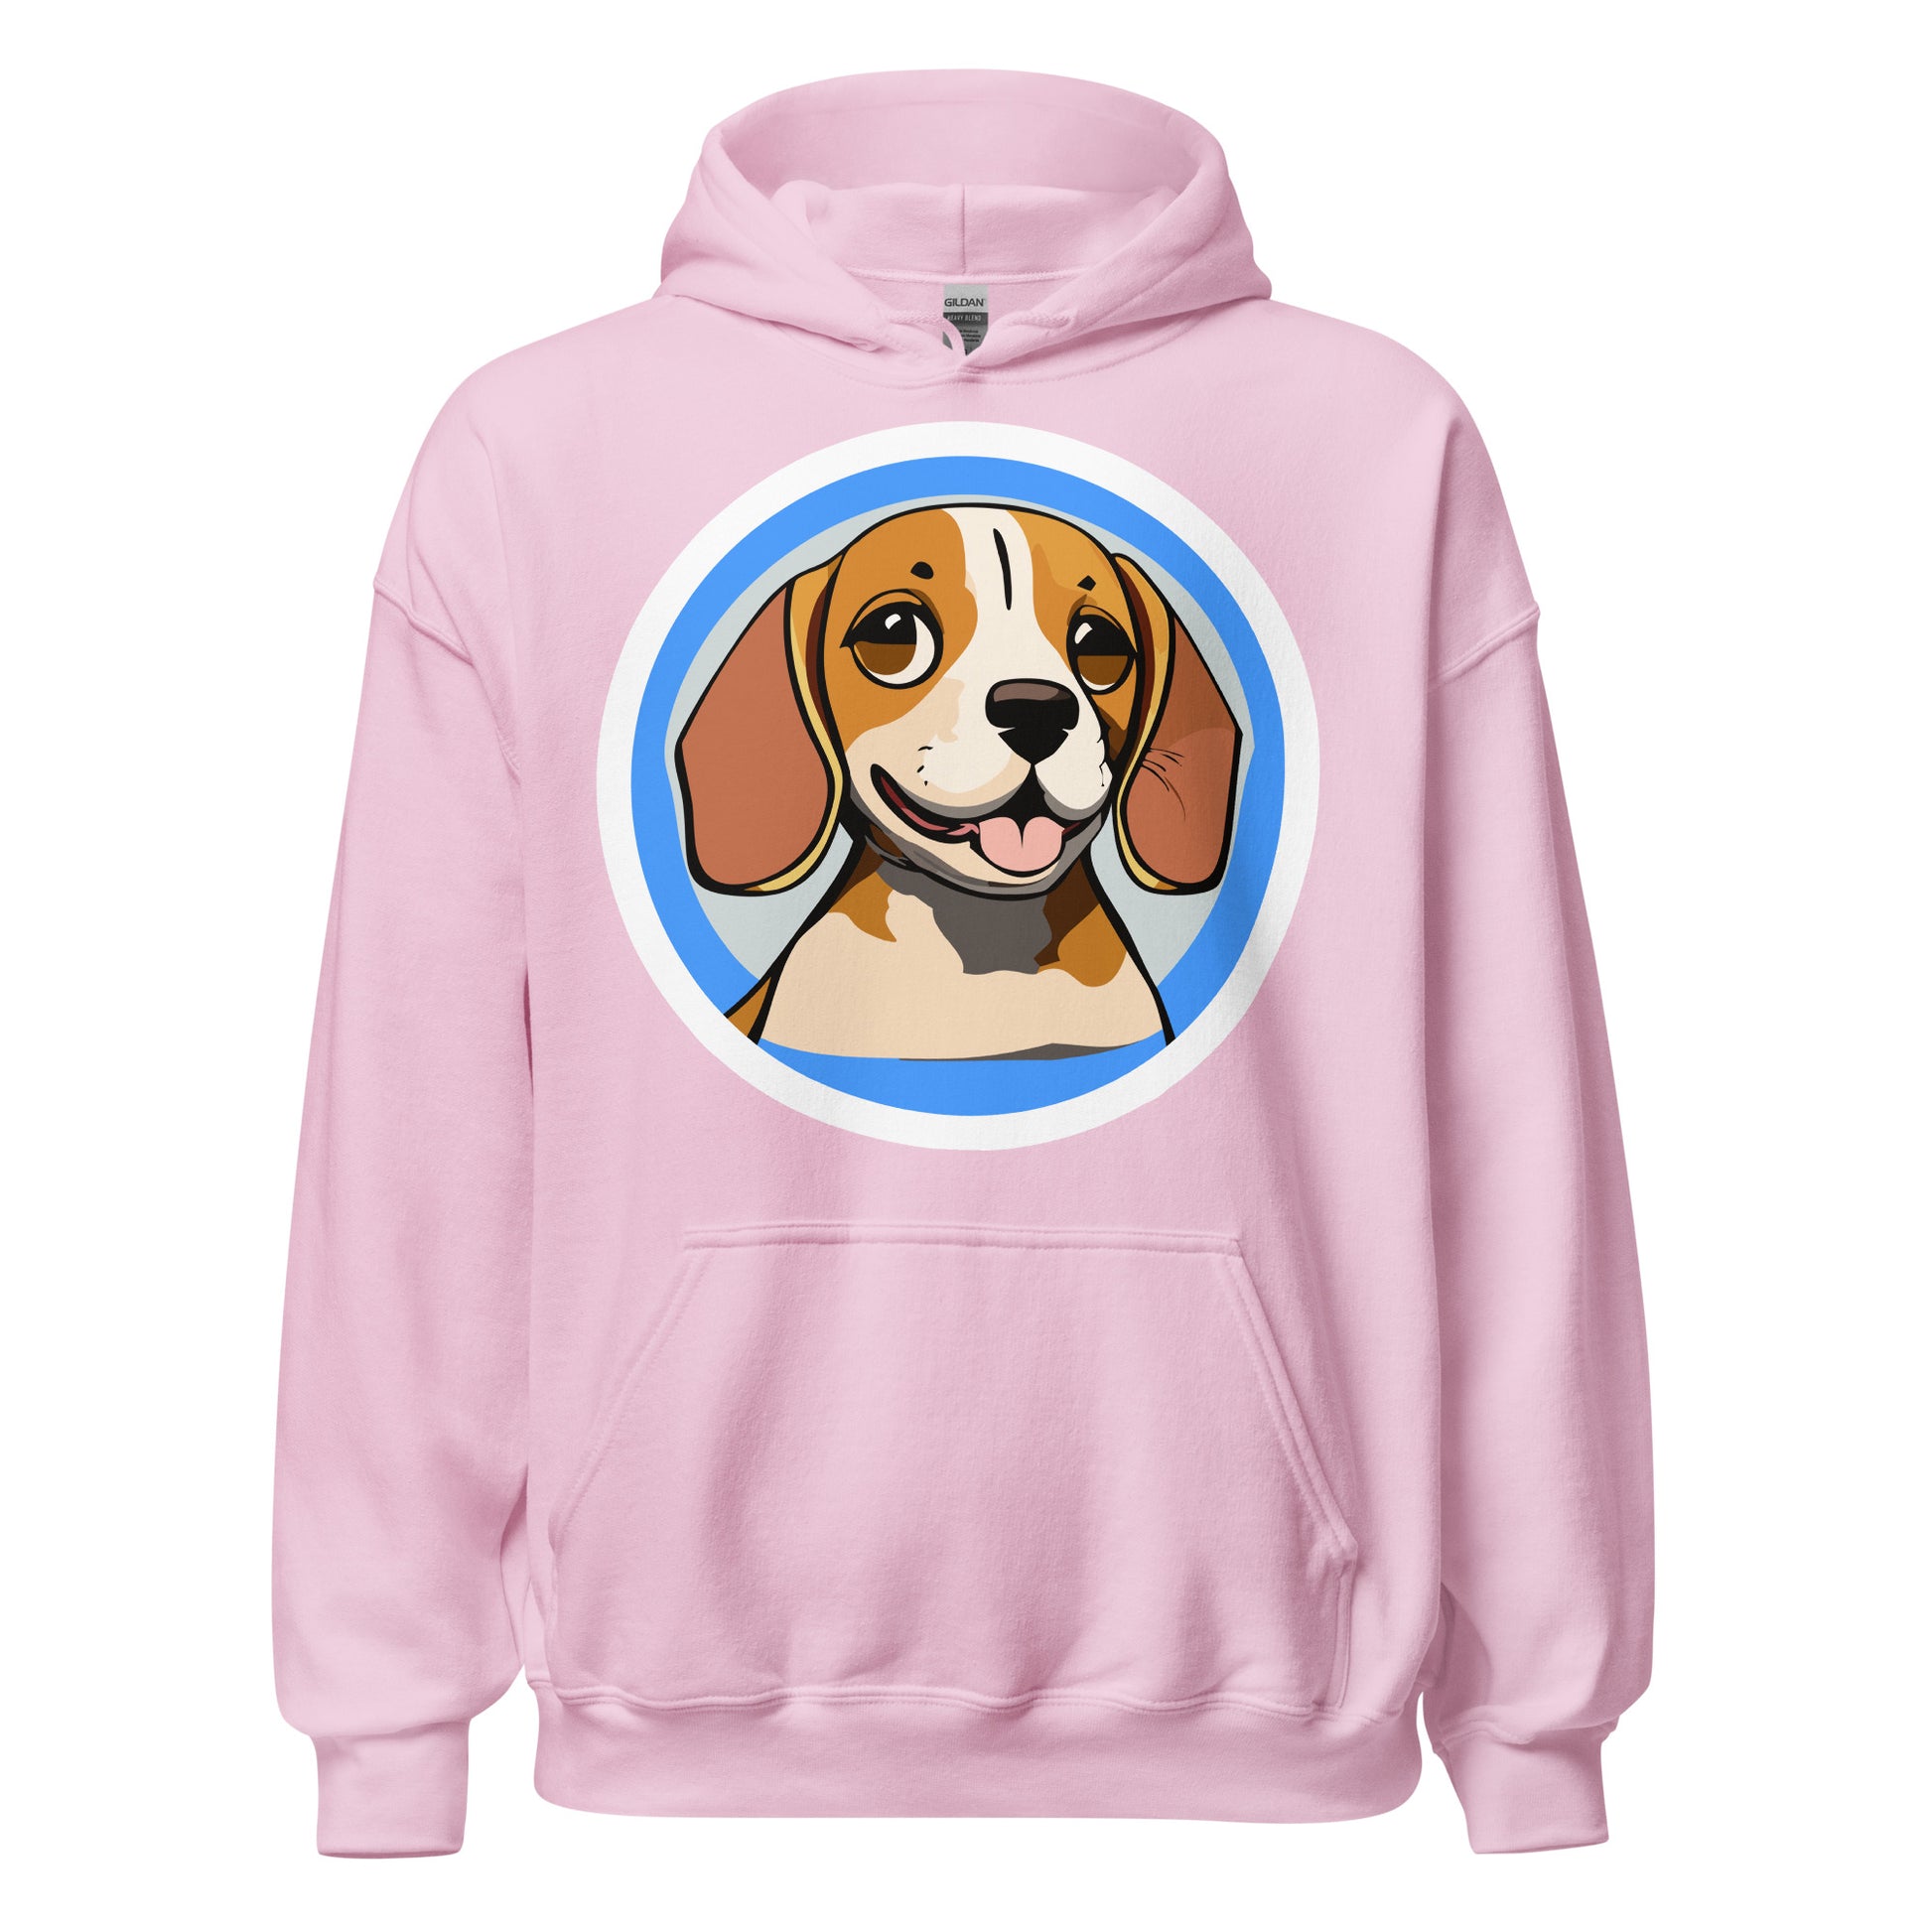 Comfy unisex hoodie for him or her with a cute beagle image, in light pink